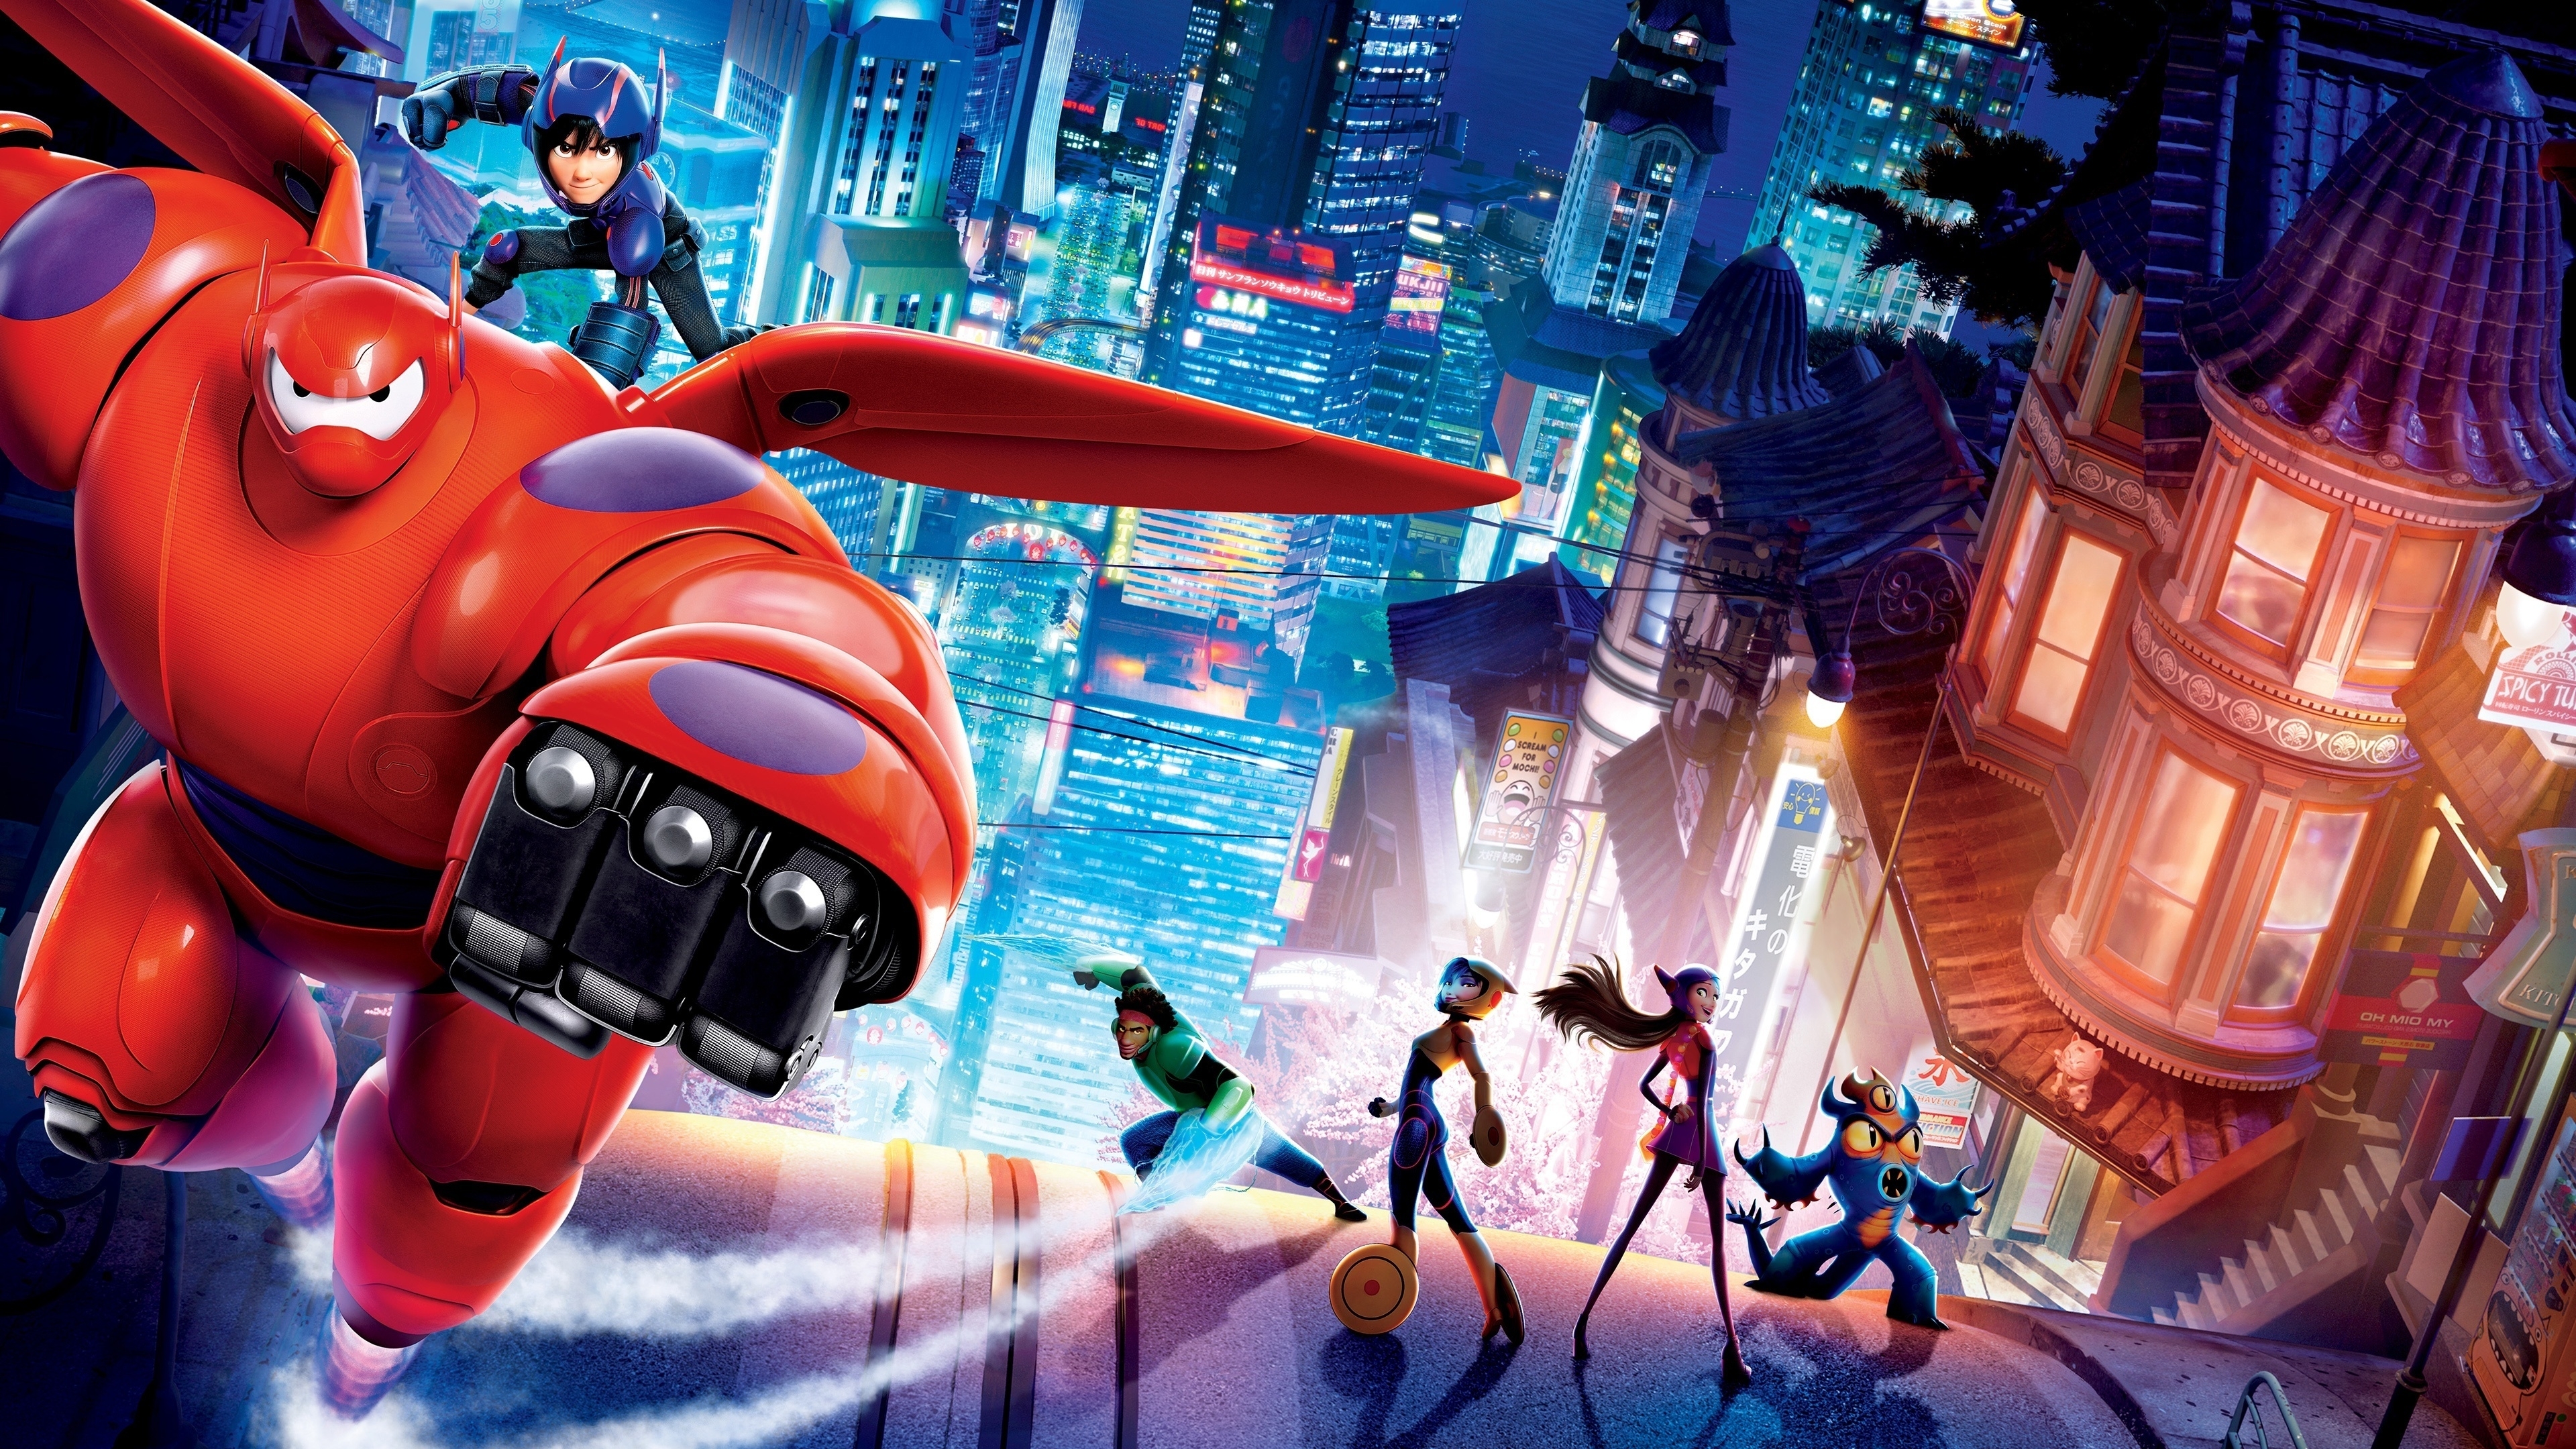 10 Latest Big Hero 6 Wallpaper FULL HD 1920×1080 For PC Background